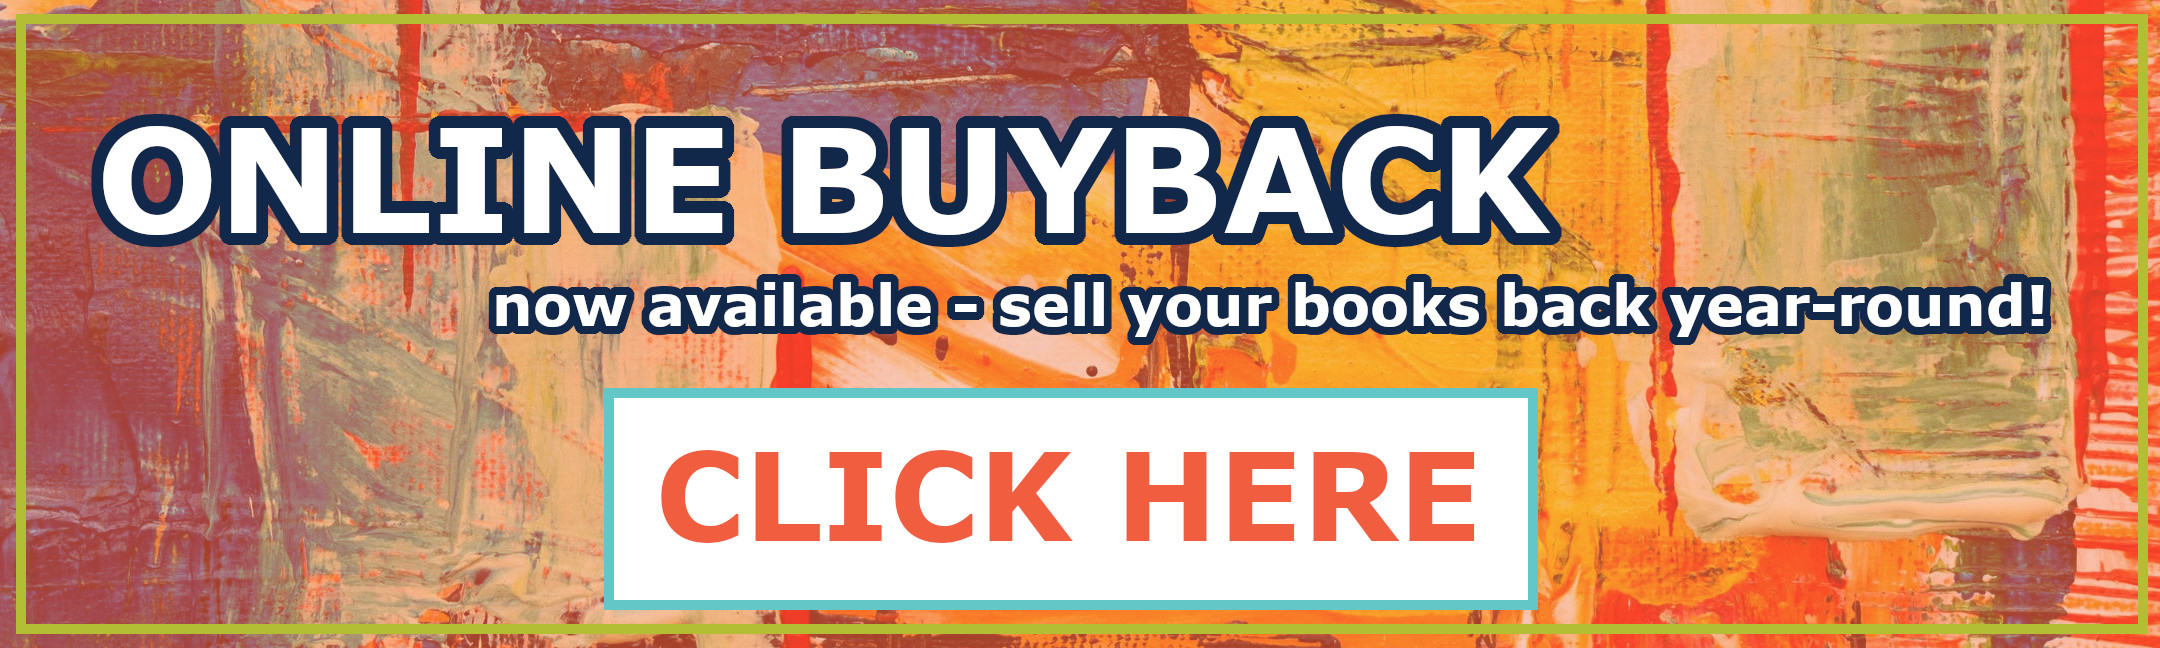 buyback, sell your books back year round, click here